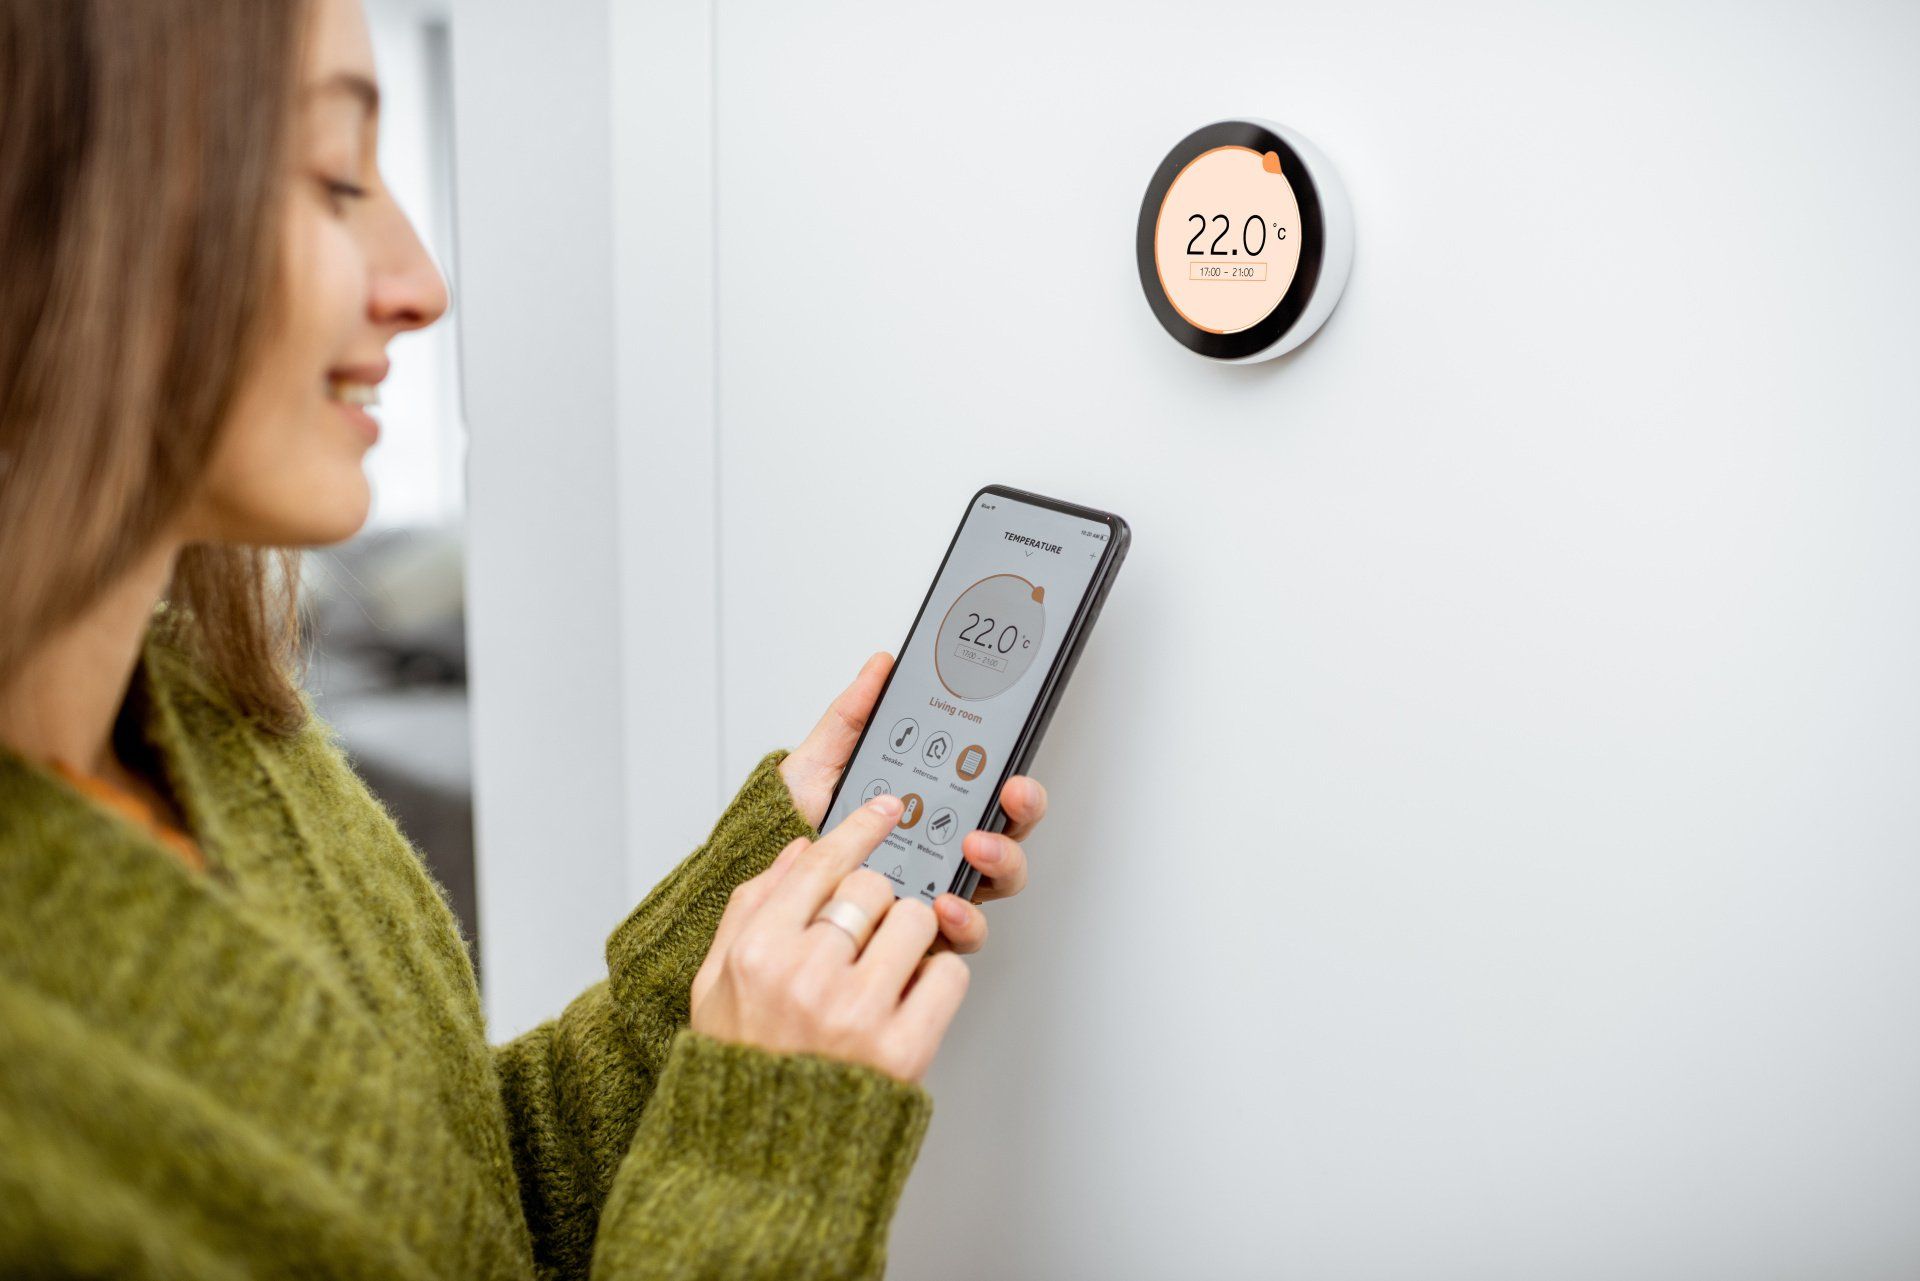 An individual adjusts the room temperature using a smartphone app, interacting with a wireless smart thermostat placed on a plain white background.